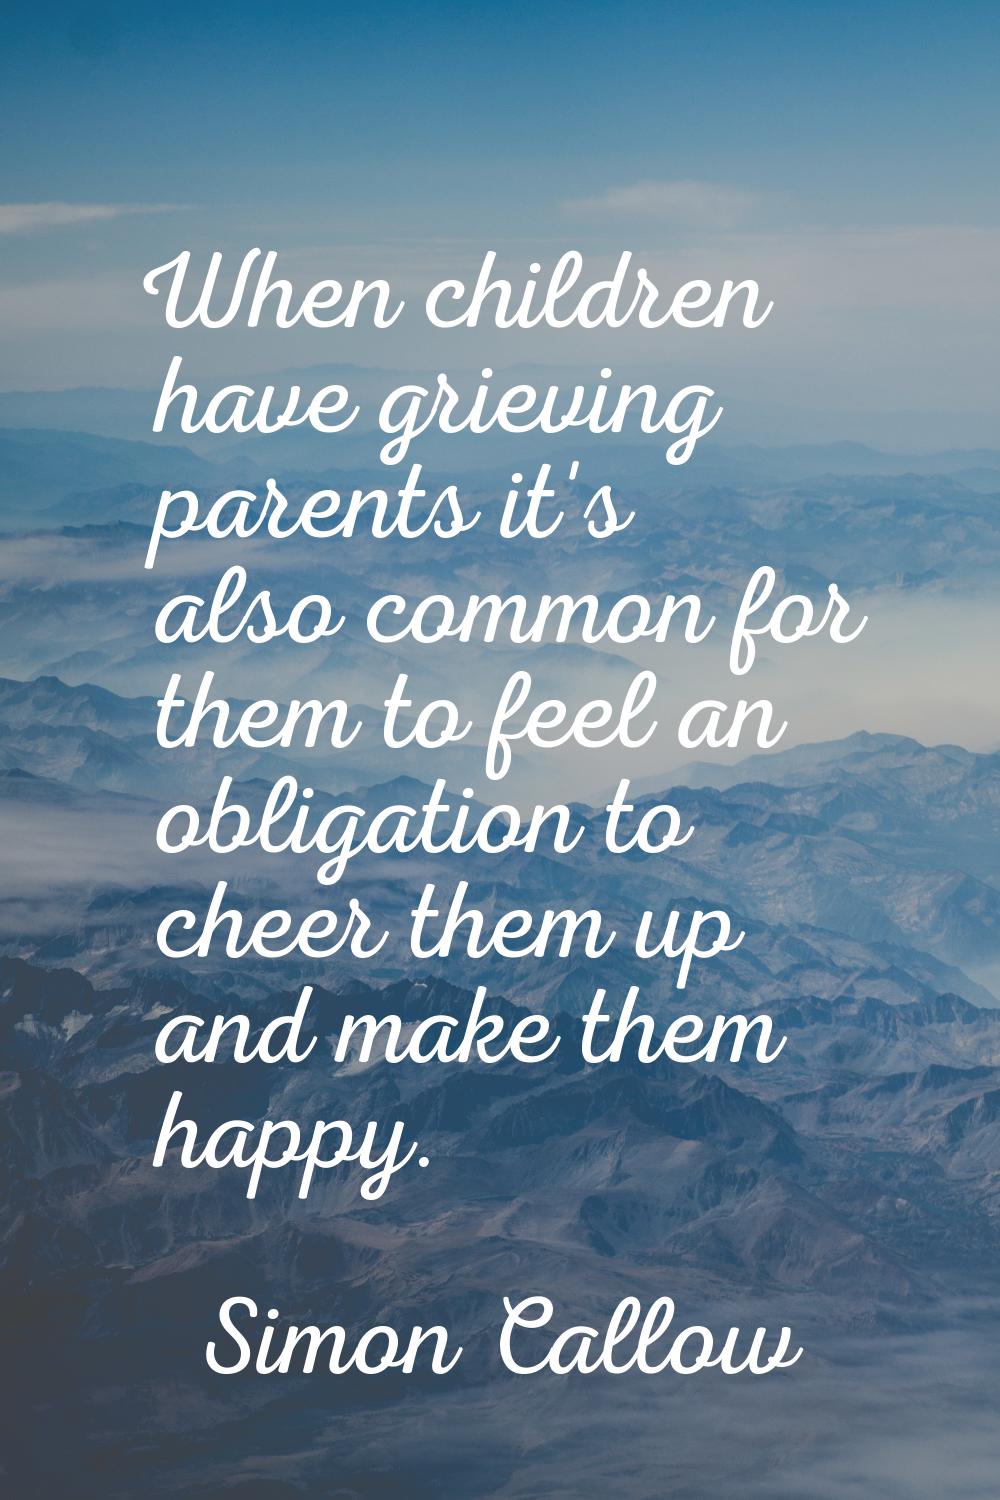 When children have grieving parents it's also common for them to feel an obligation to cheer them u